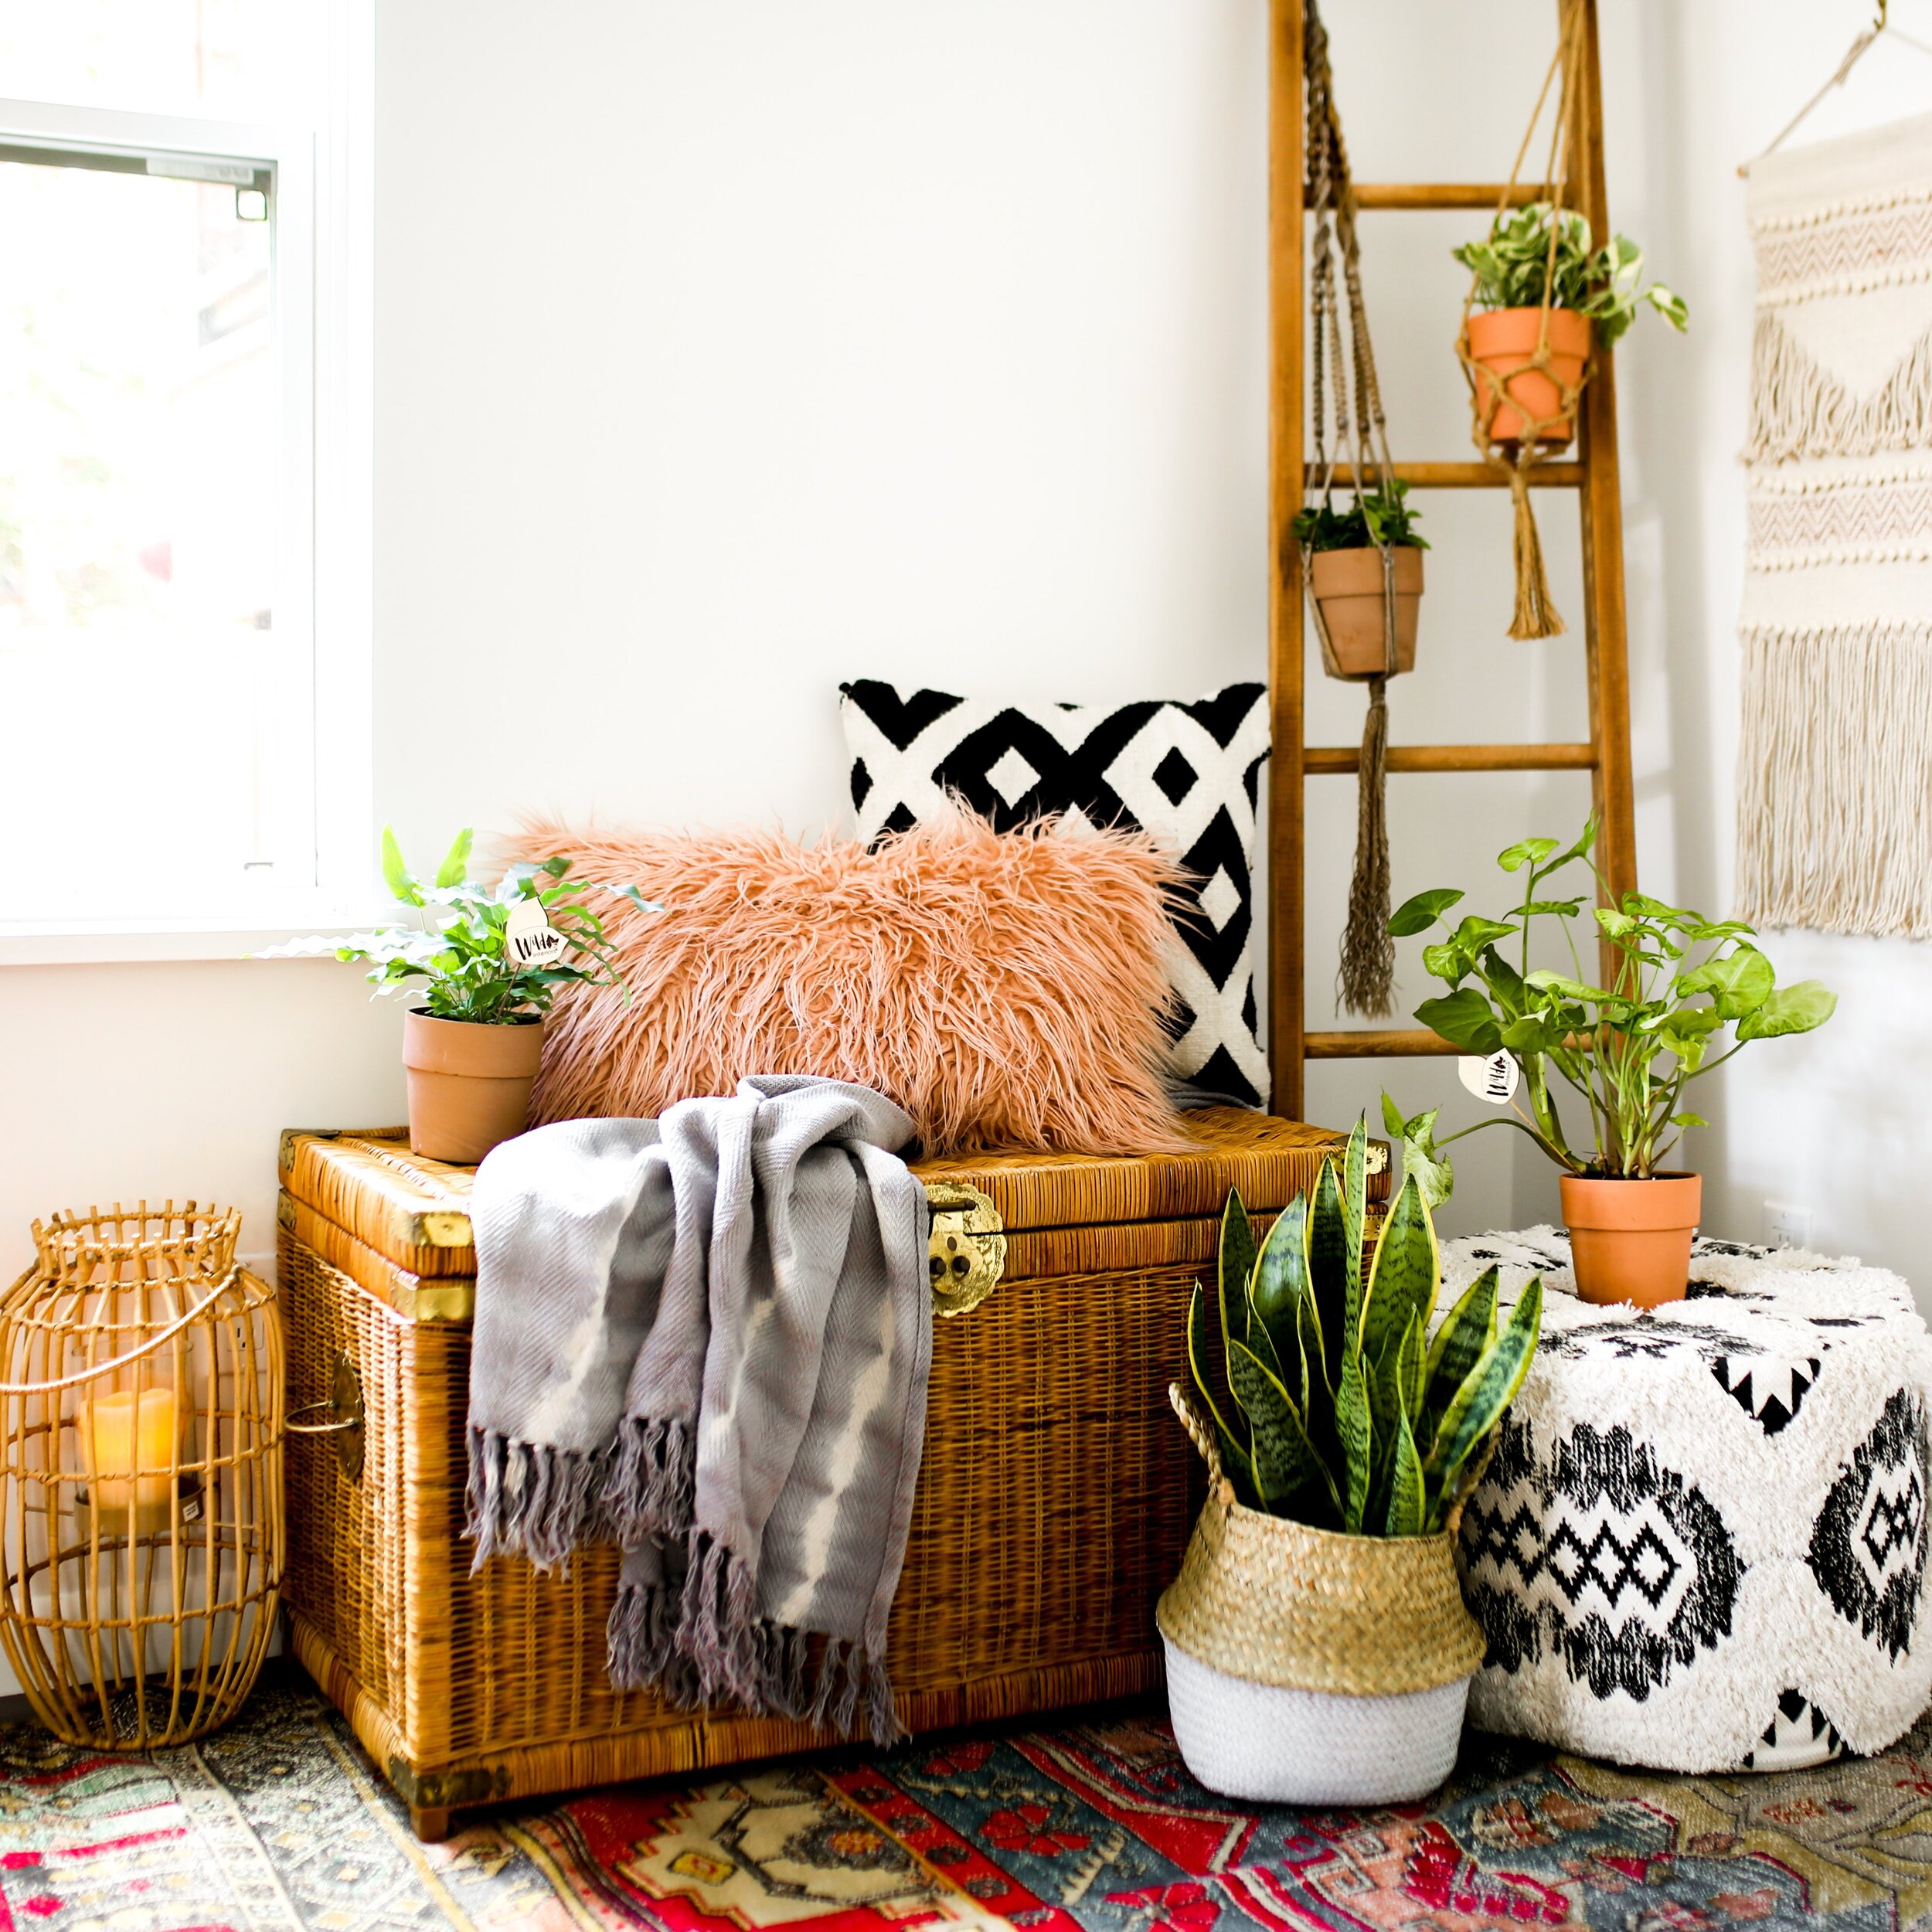 Wild Interiors — Decorating With Plants: A Boho Decor Guide